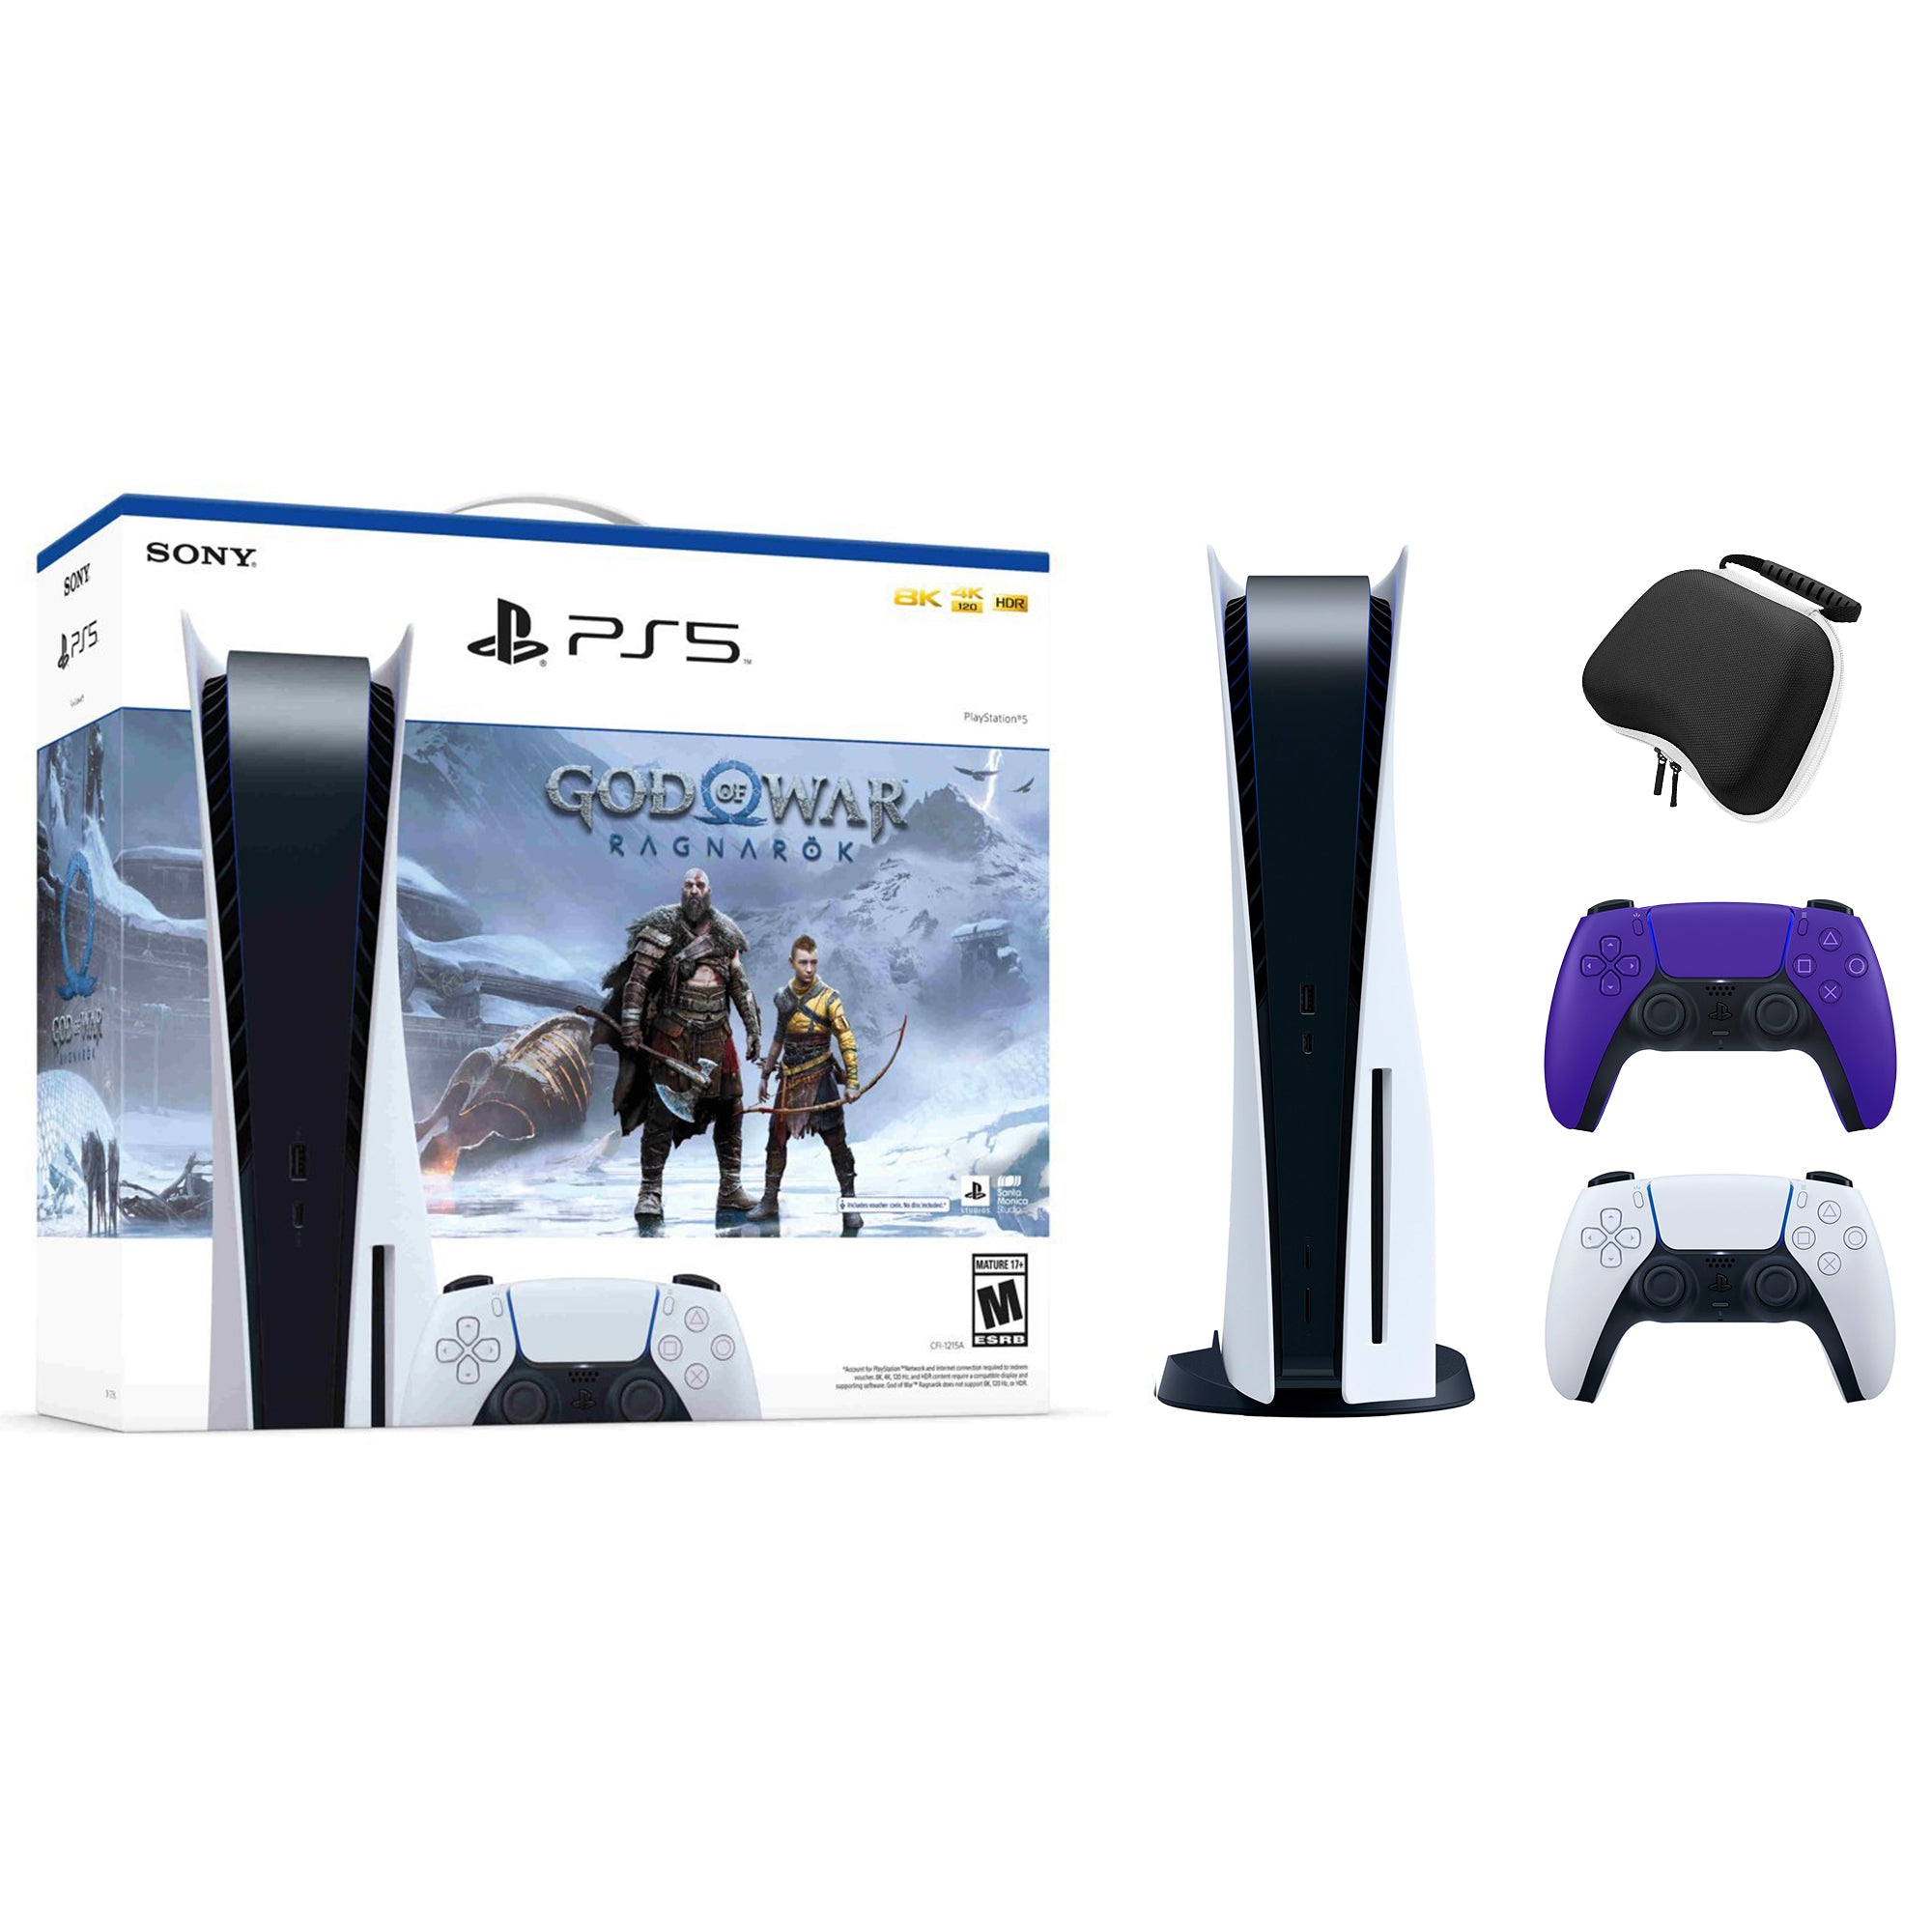 PlayStation 5 Disc Edition God of War Ragnarok Bundle with Two Controllers White and Galactic Purple DualSense and Mytrix Hard Shell Protective Controller Case